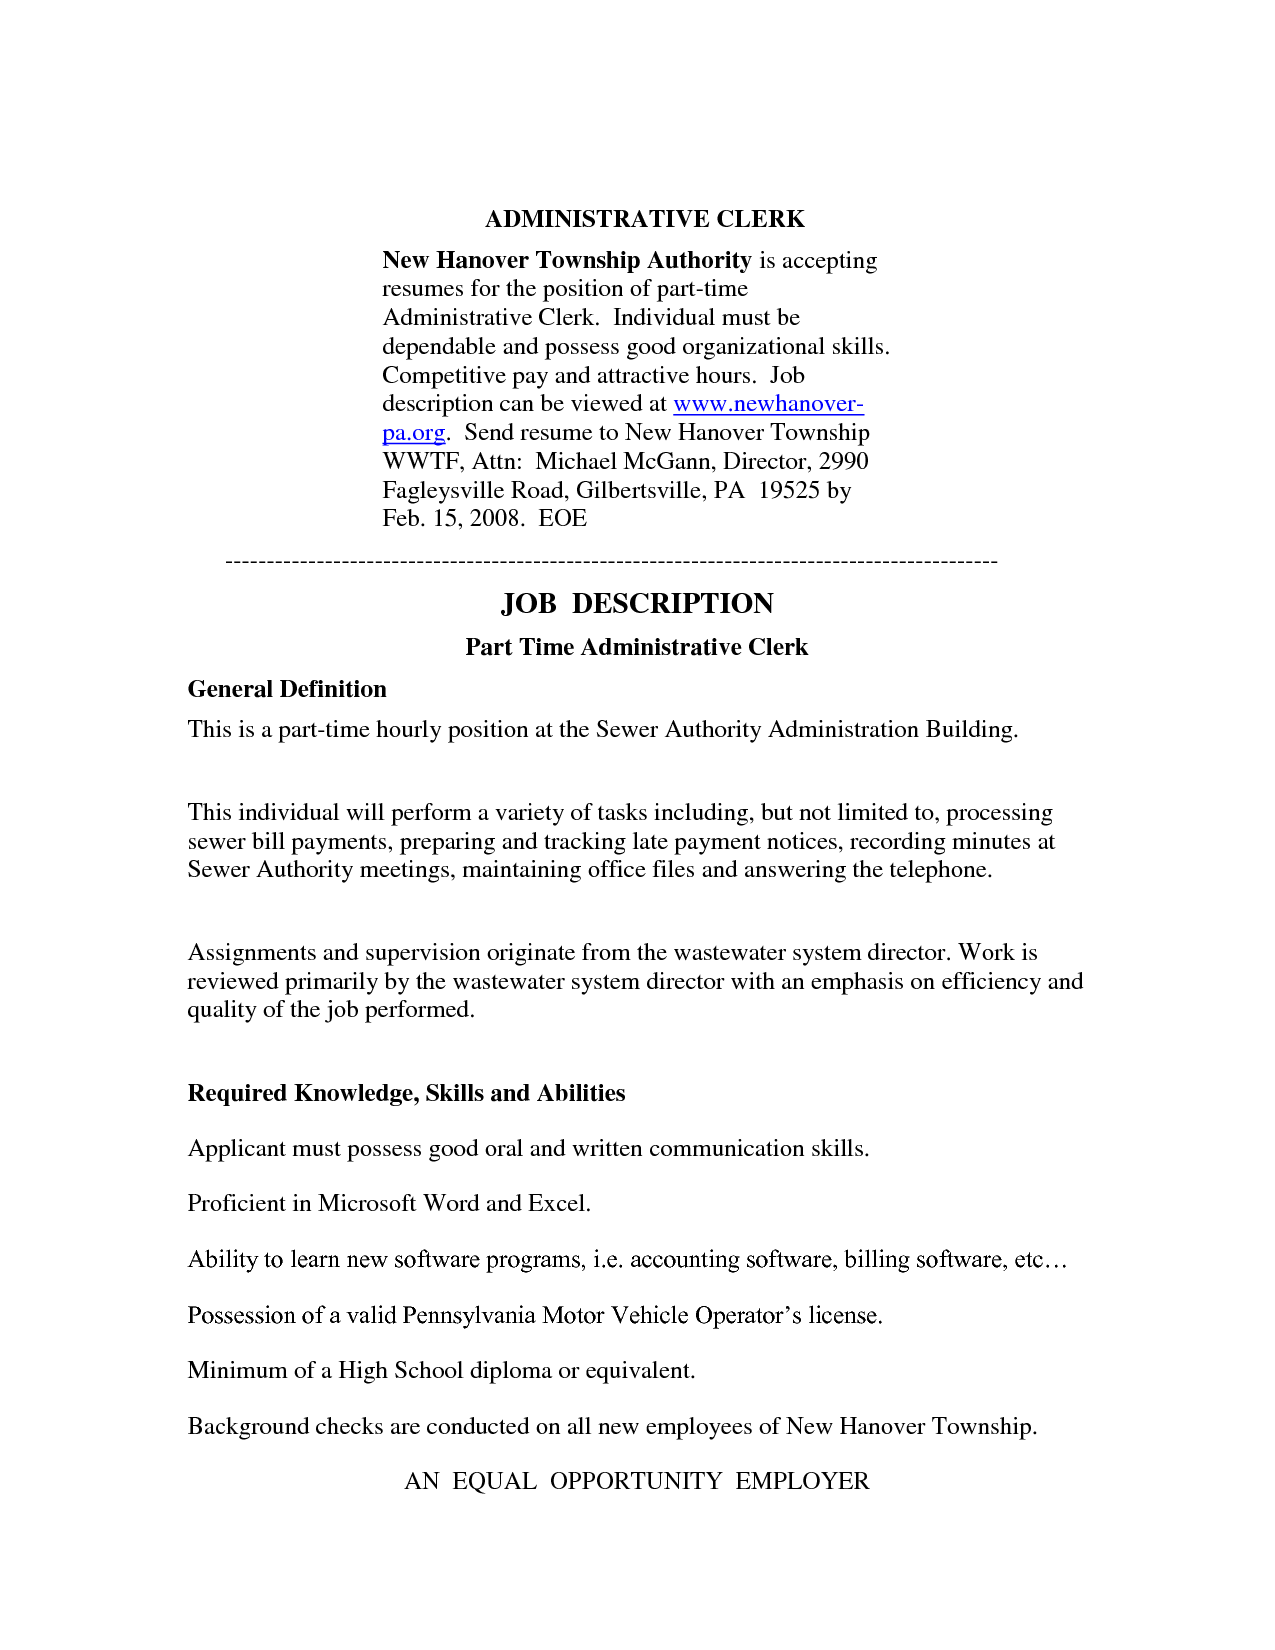 Related Pictures Job Description Sample Page 2 Marketing Manager